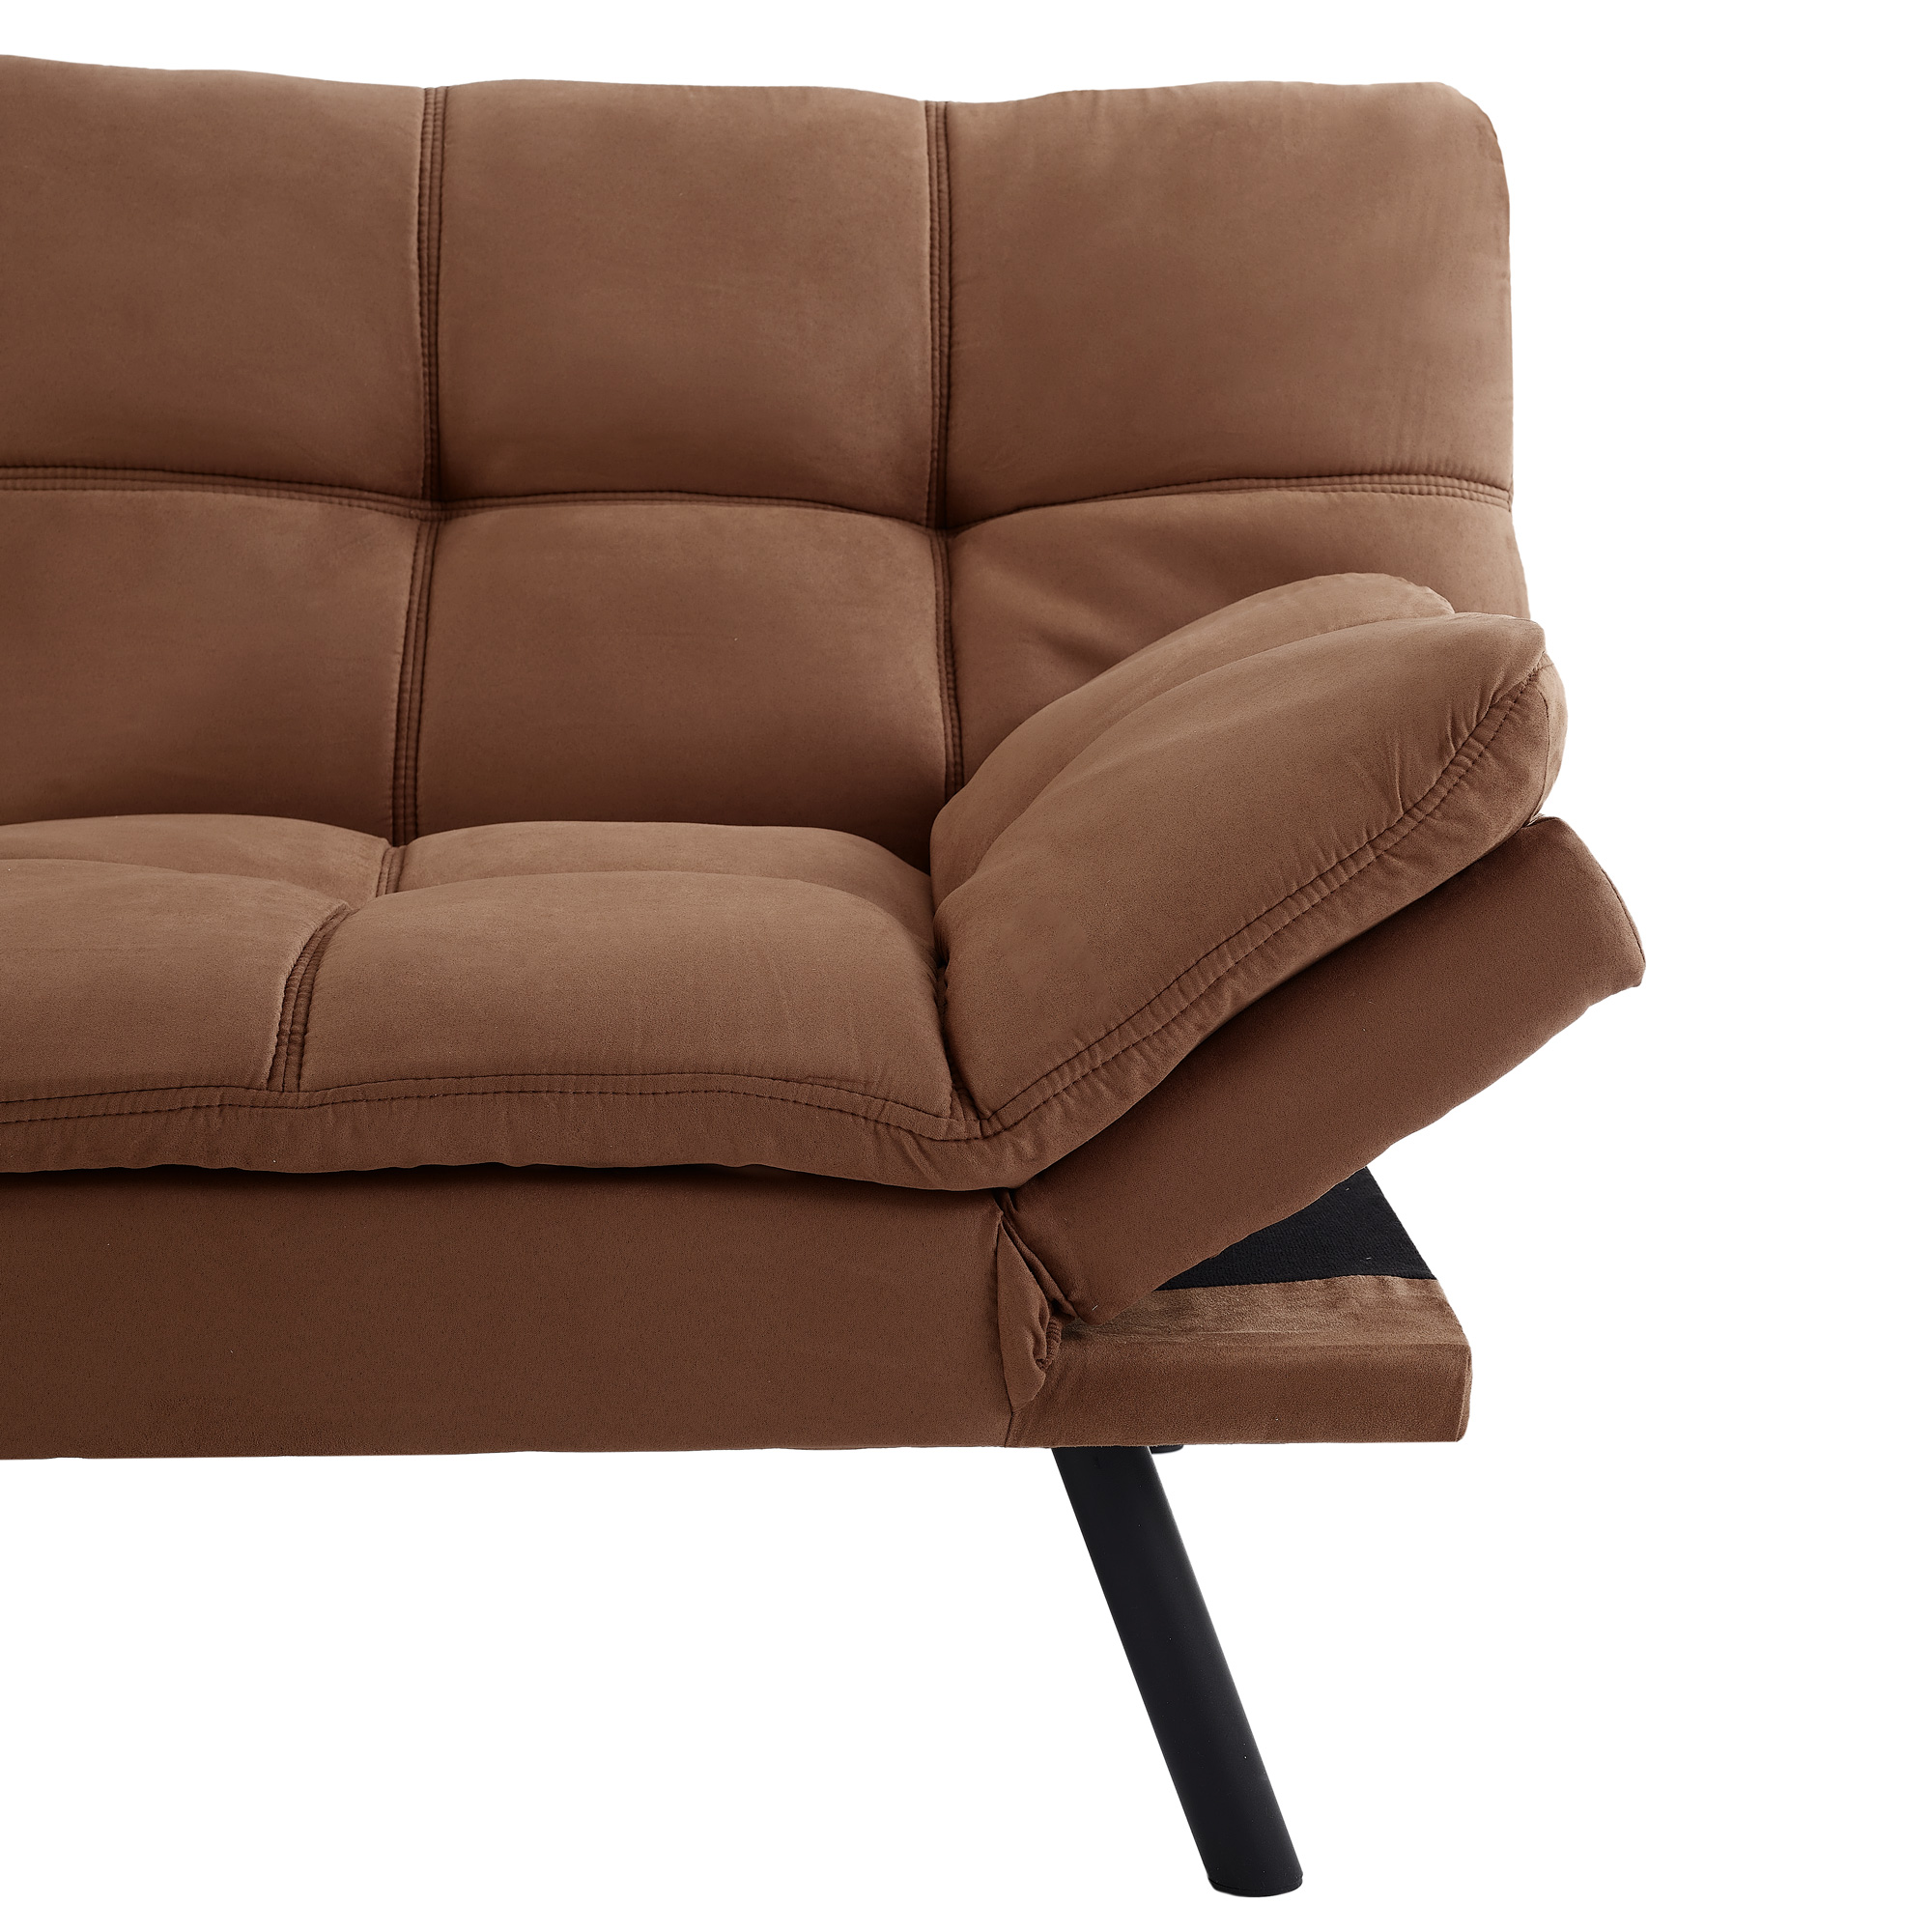 Mainstays Memory Foam Futon with Adjustable Armrests , Camel Faux Suede Fabric for Adults - image 3 of 9